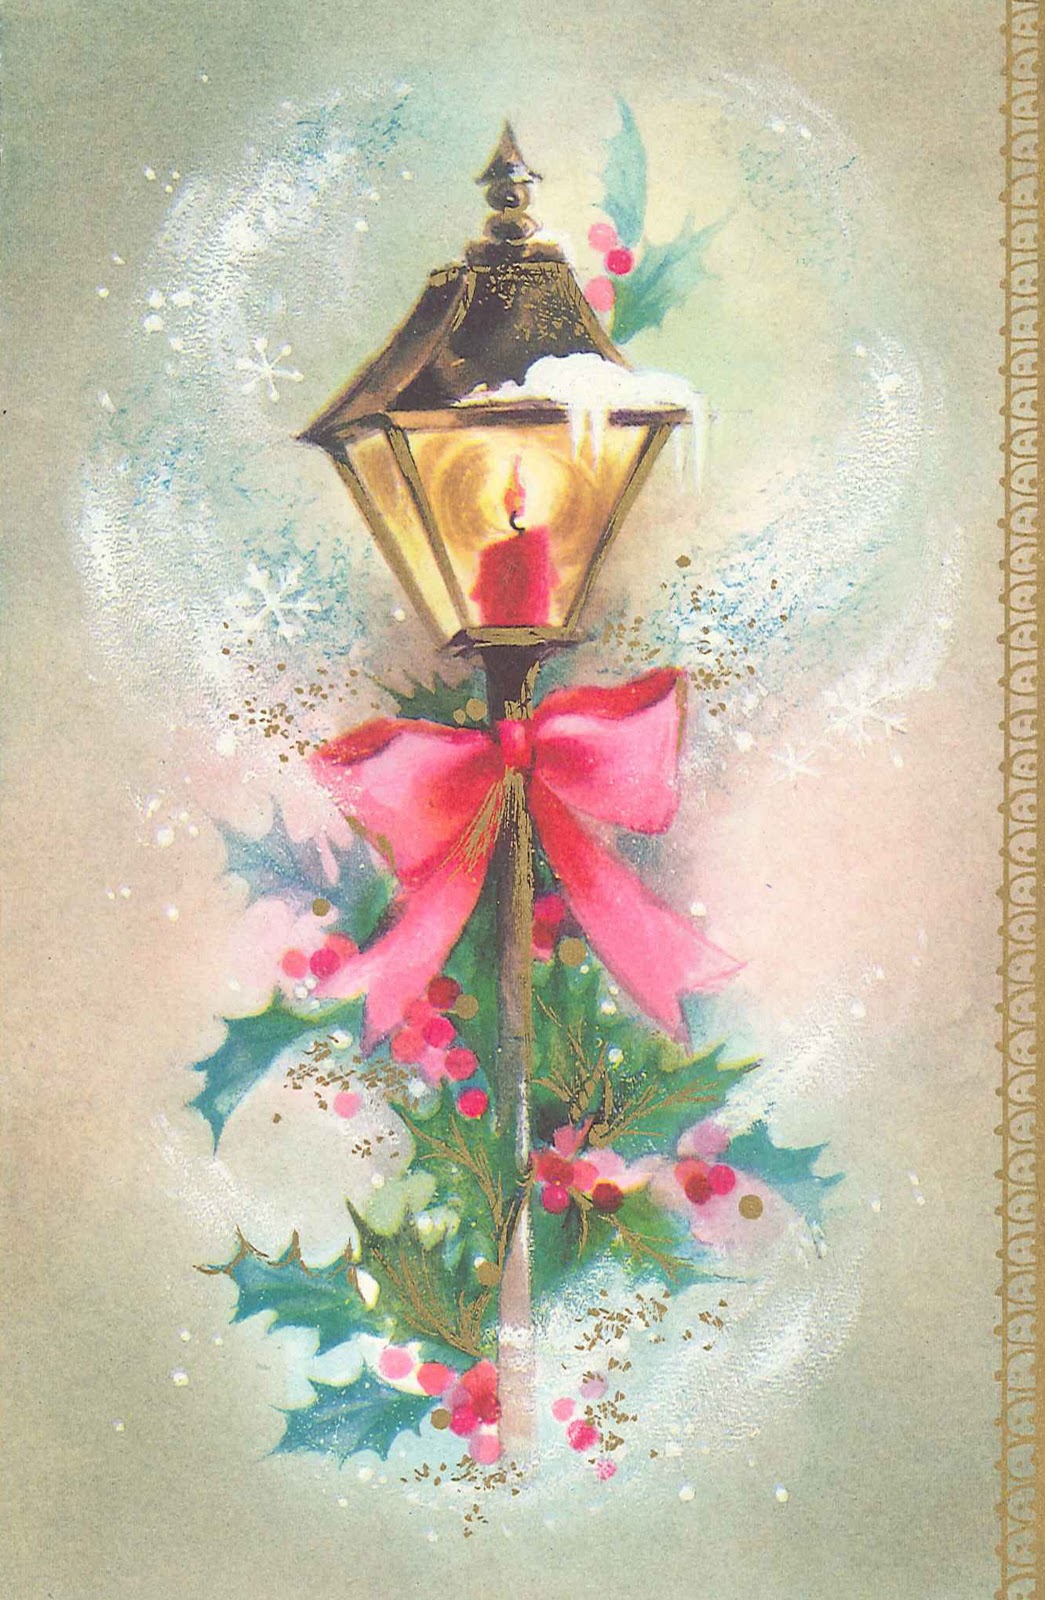 Very Merry Vintage Syle Very Merry Vintage Christmas Card Images And Greetings From Me To You 